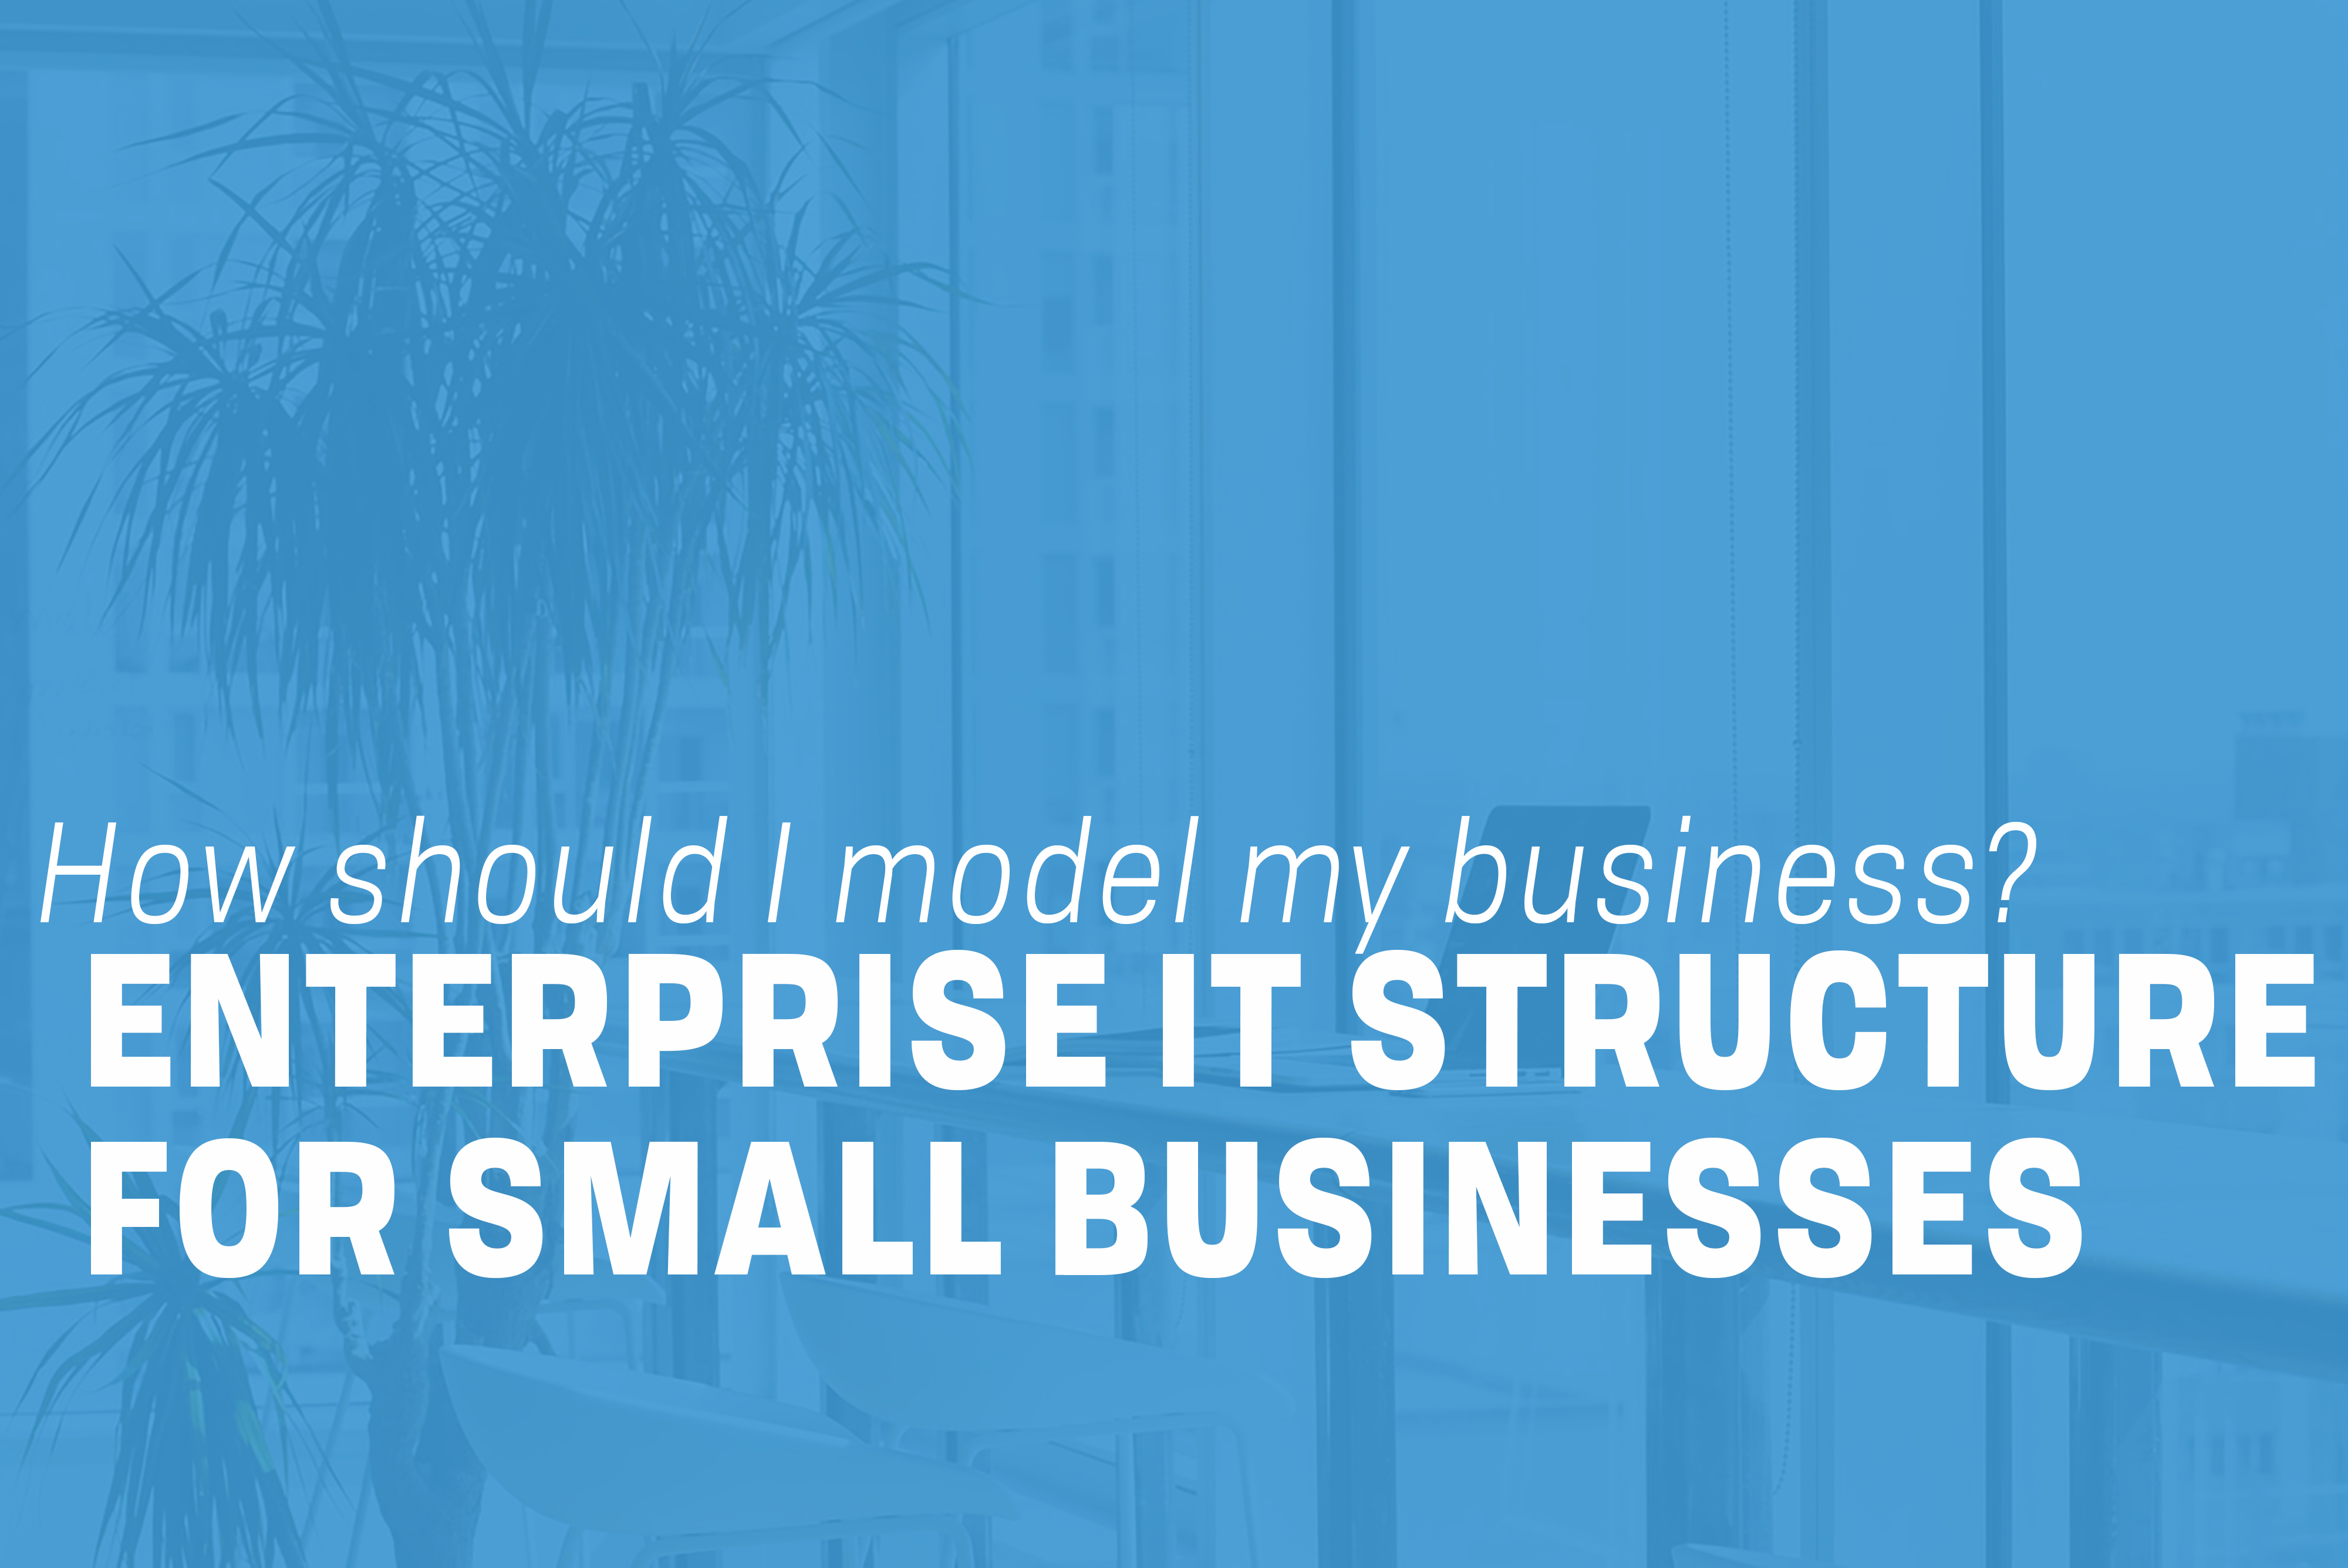 You are currently viewing Developing an Enterprise IT Structure for Small Businesses